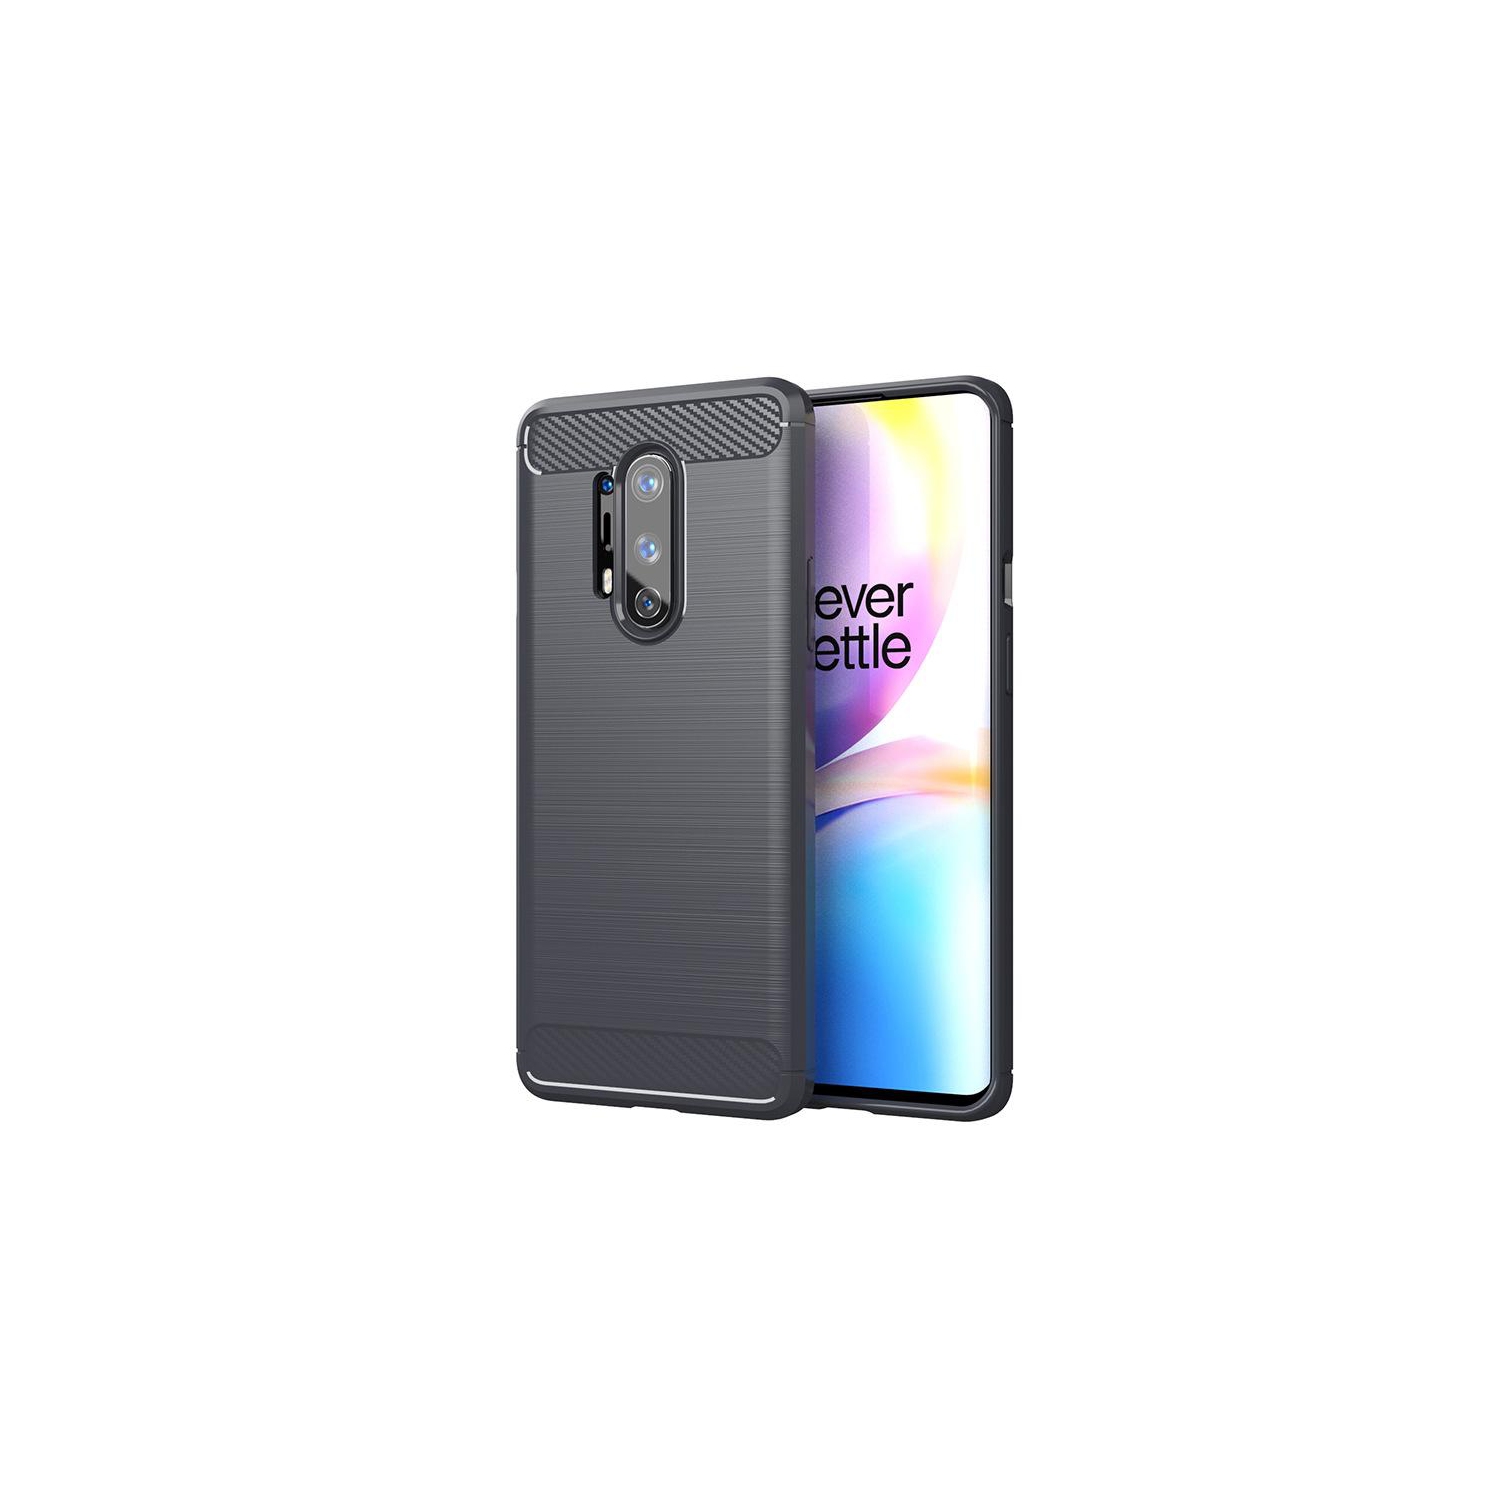 PANDACO Grey Brushed Metal Case for OnePlus 8 Pro